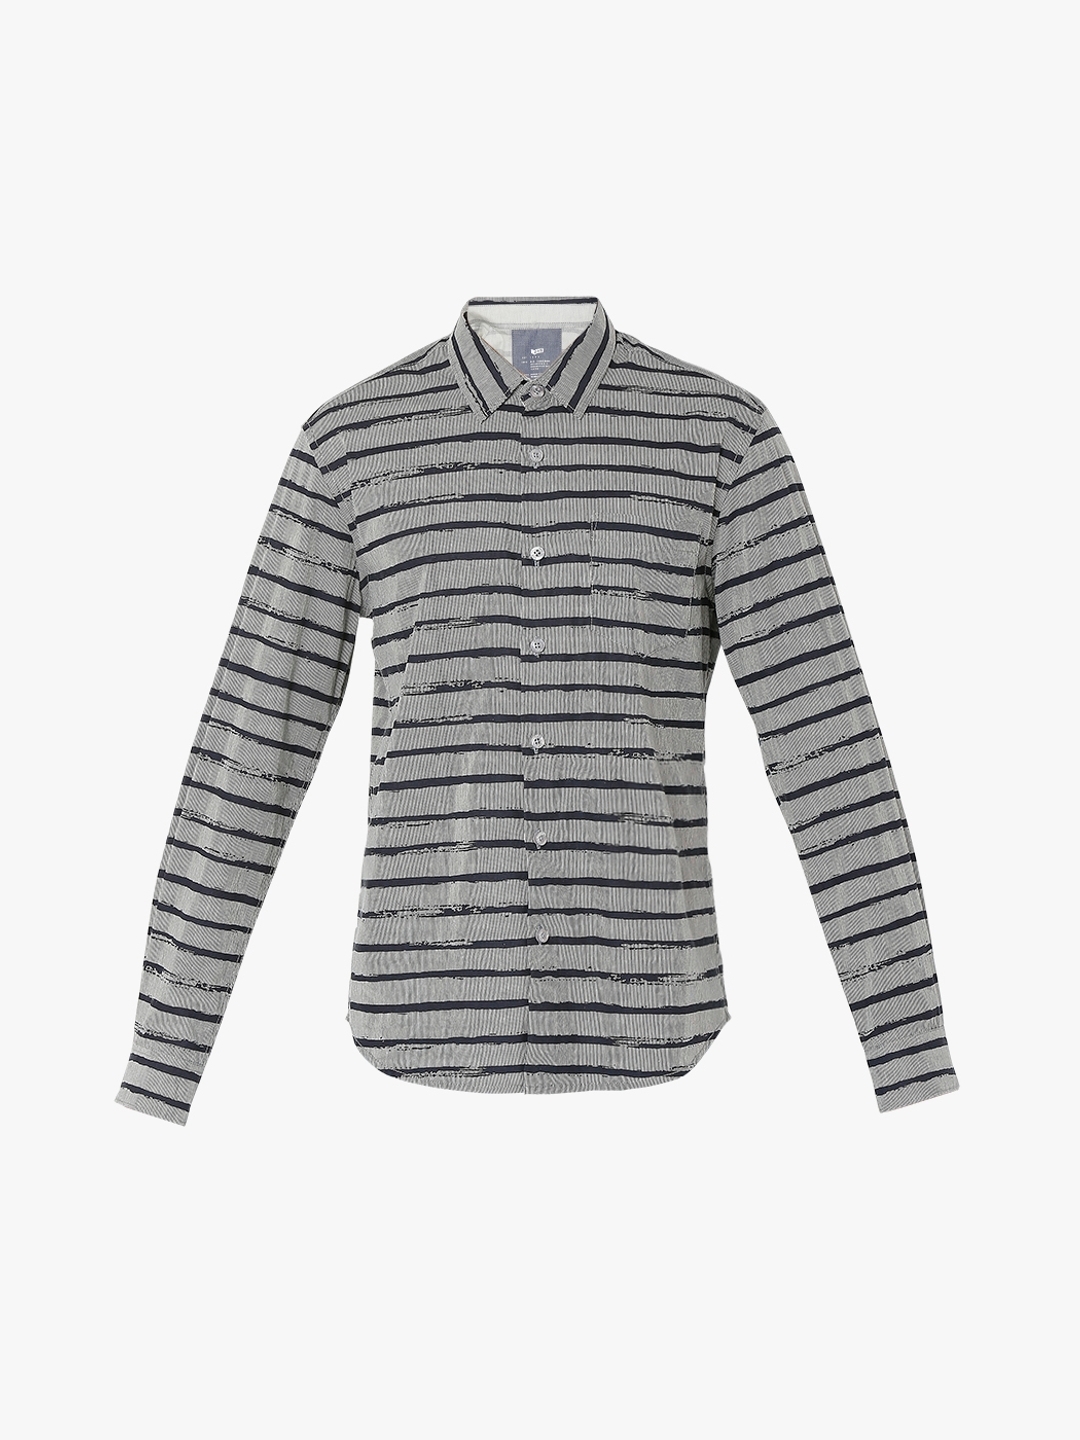 Caio Stroke Relaxed Fit Shirt